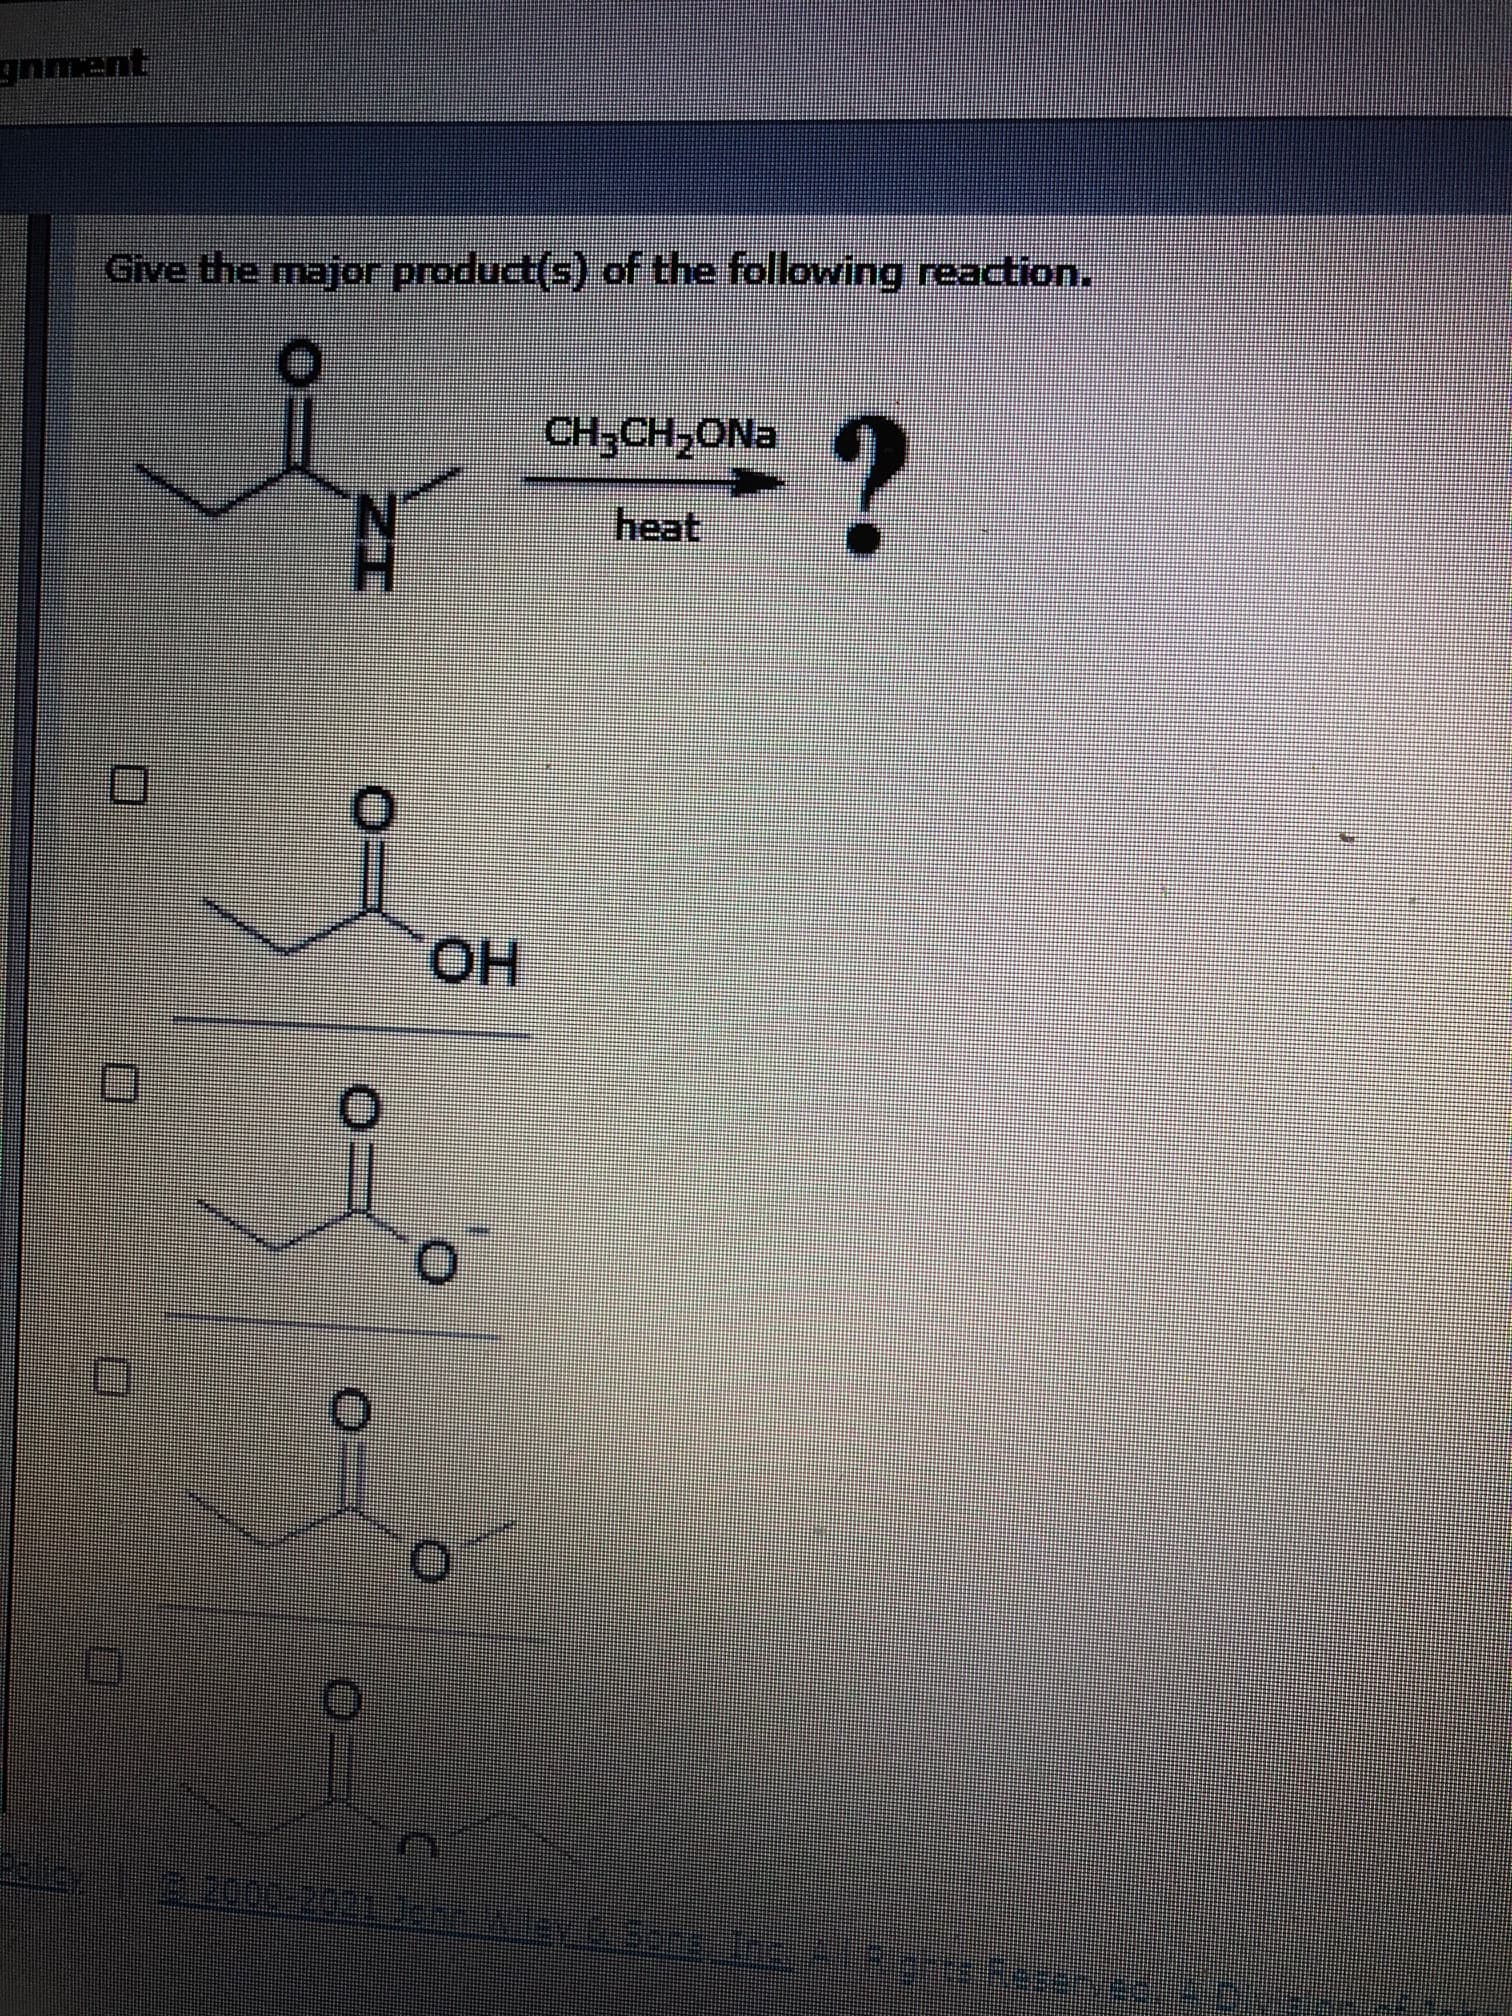 Give the major product(s) of the following reaction.
CH3CH,ONa
heat
